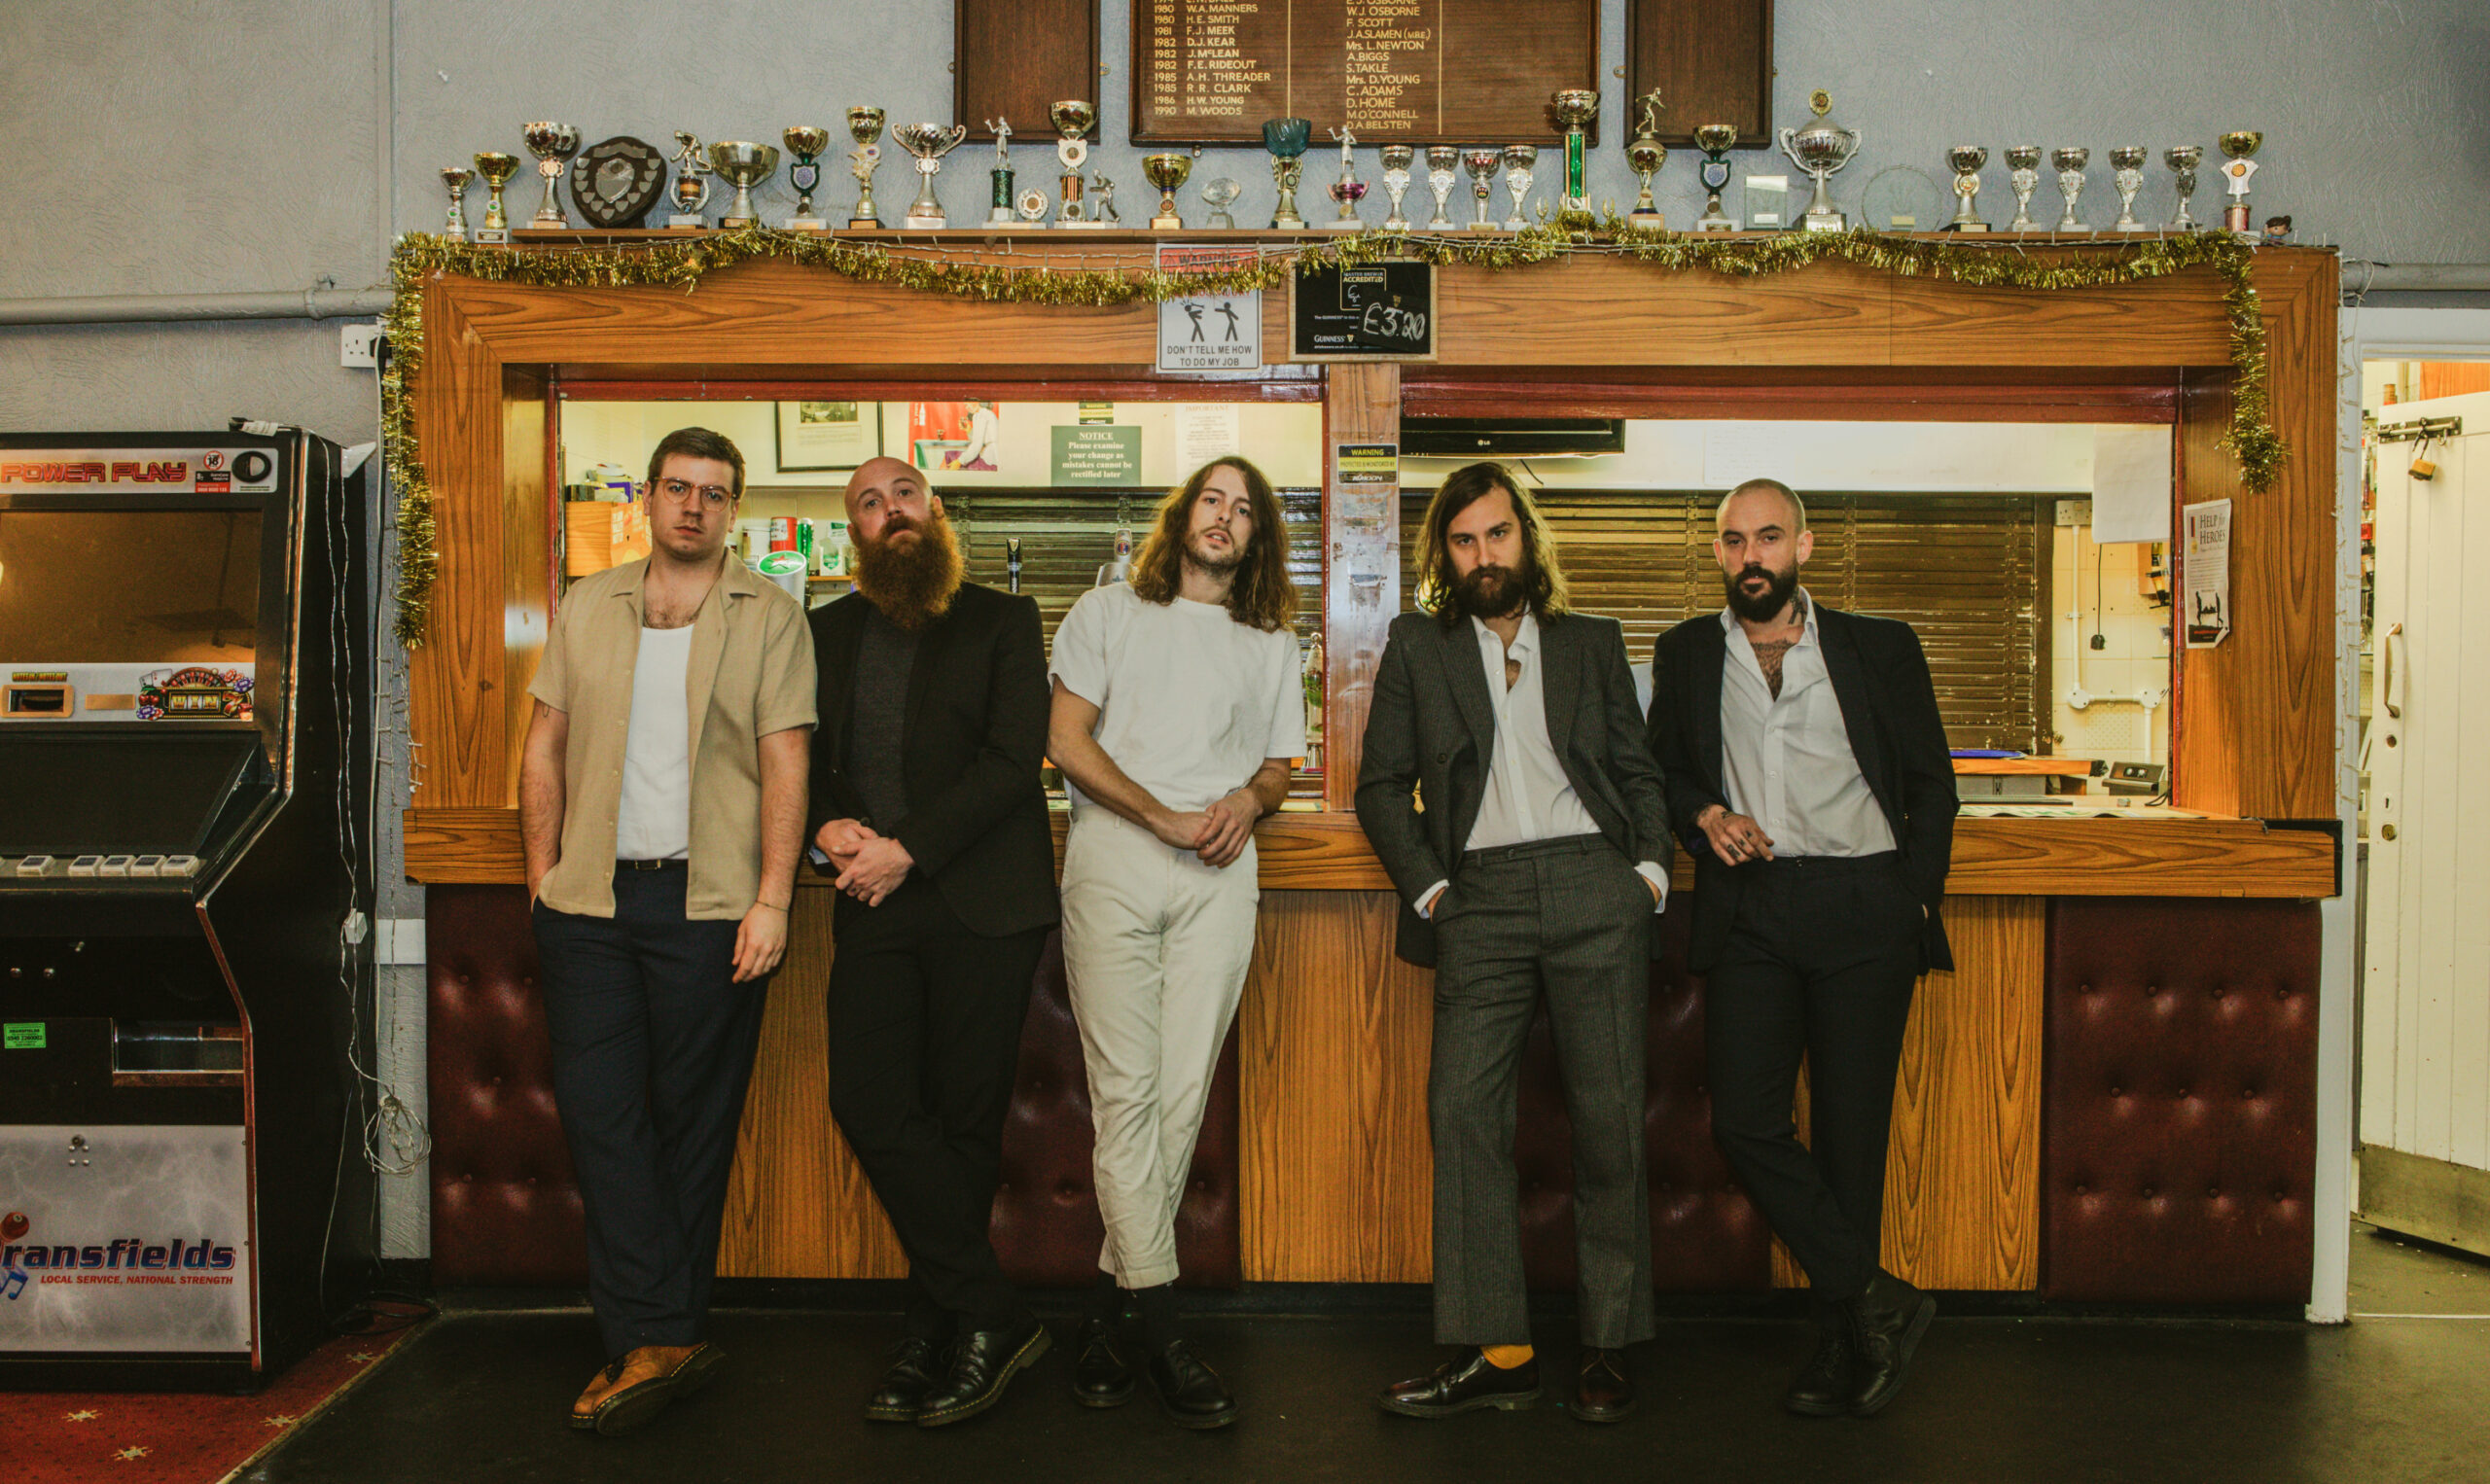 IDLES SHARE NEW TRACK ‘MODEL VILLAGE’ | OUT NOW